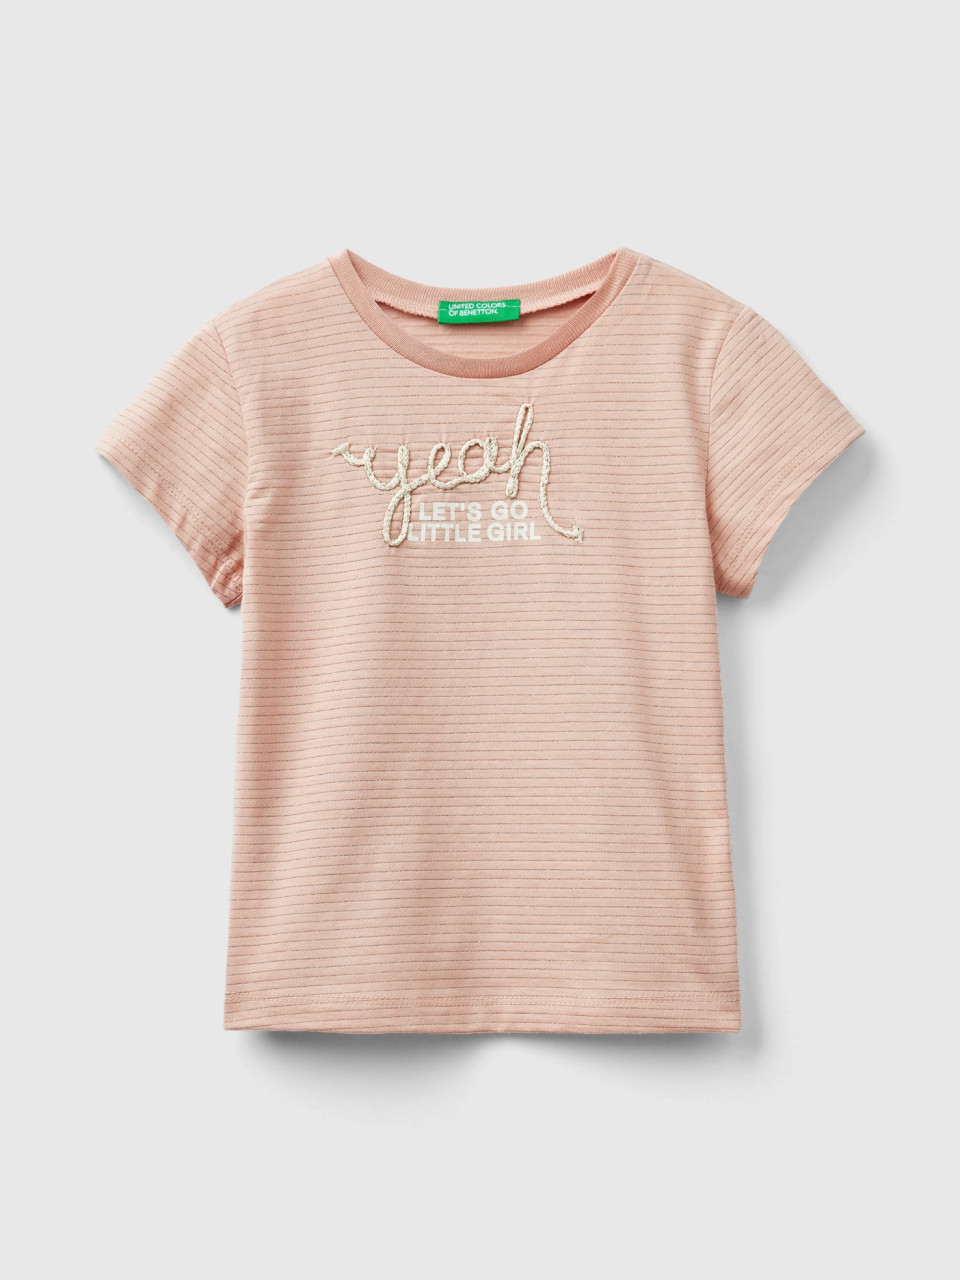 Benetton, T-shirt With Cord Embroidery, Pastel Pink, Kids